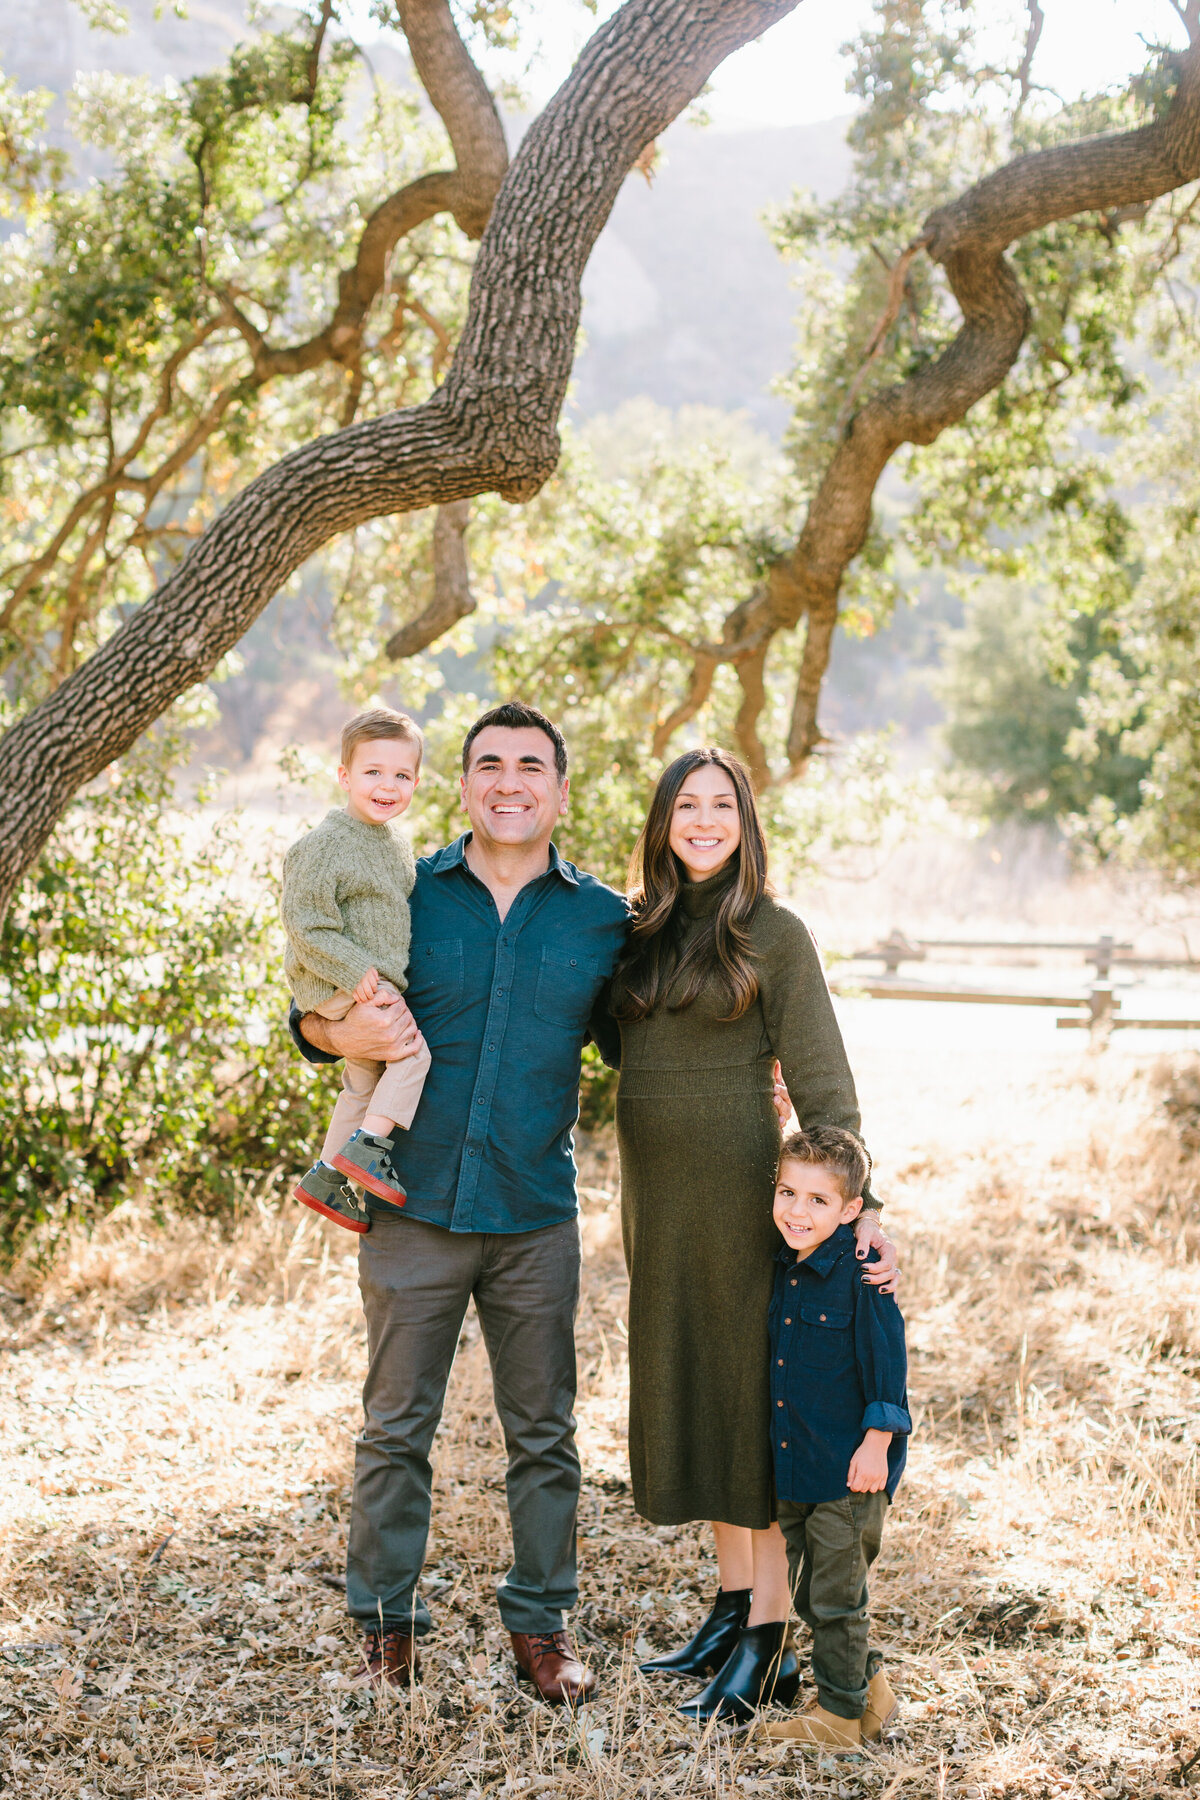 Best California and Texas Family Photographer-Jodee Debes Photography-52